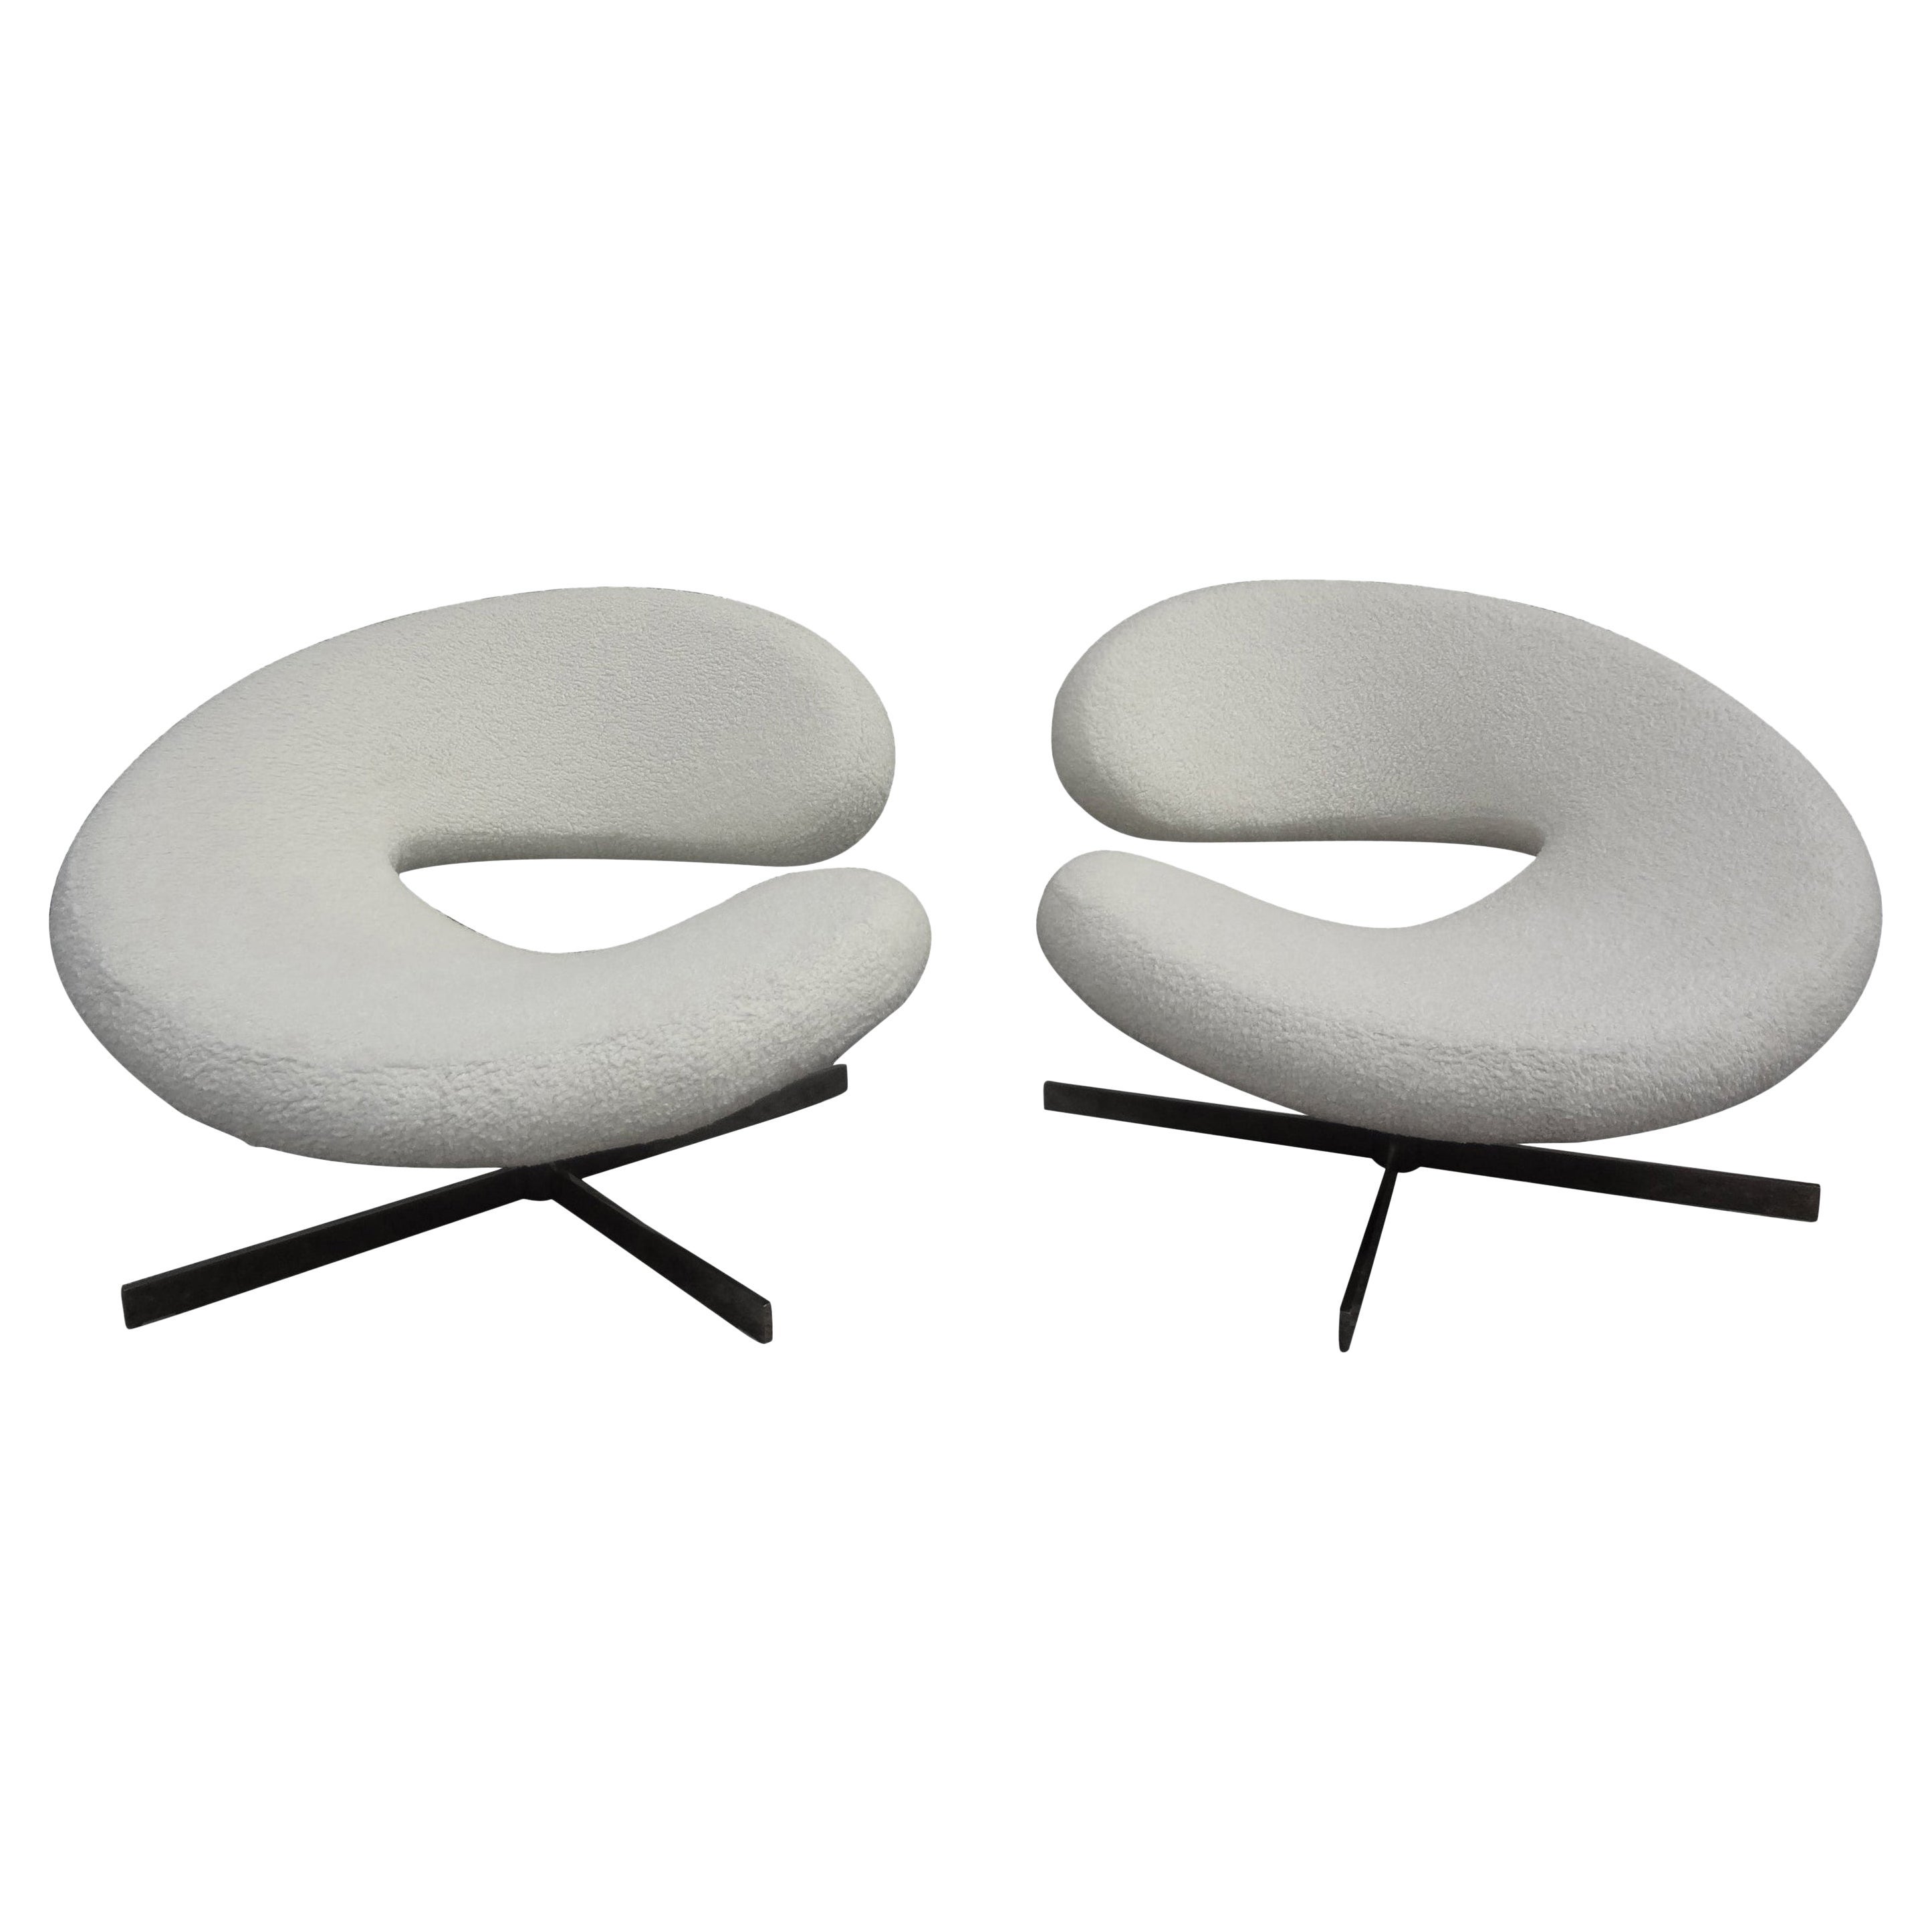 Pair of French Modernist Sculptural Swivel Chairs by Roche Bobois For Sale